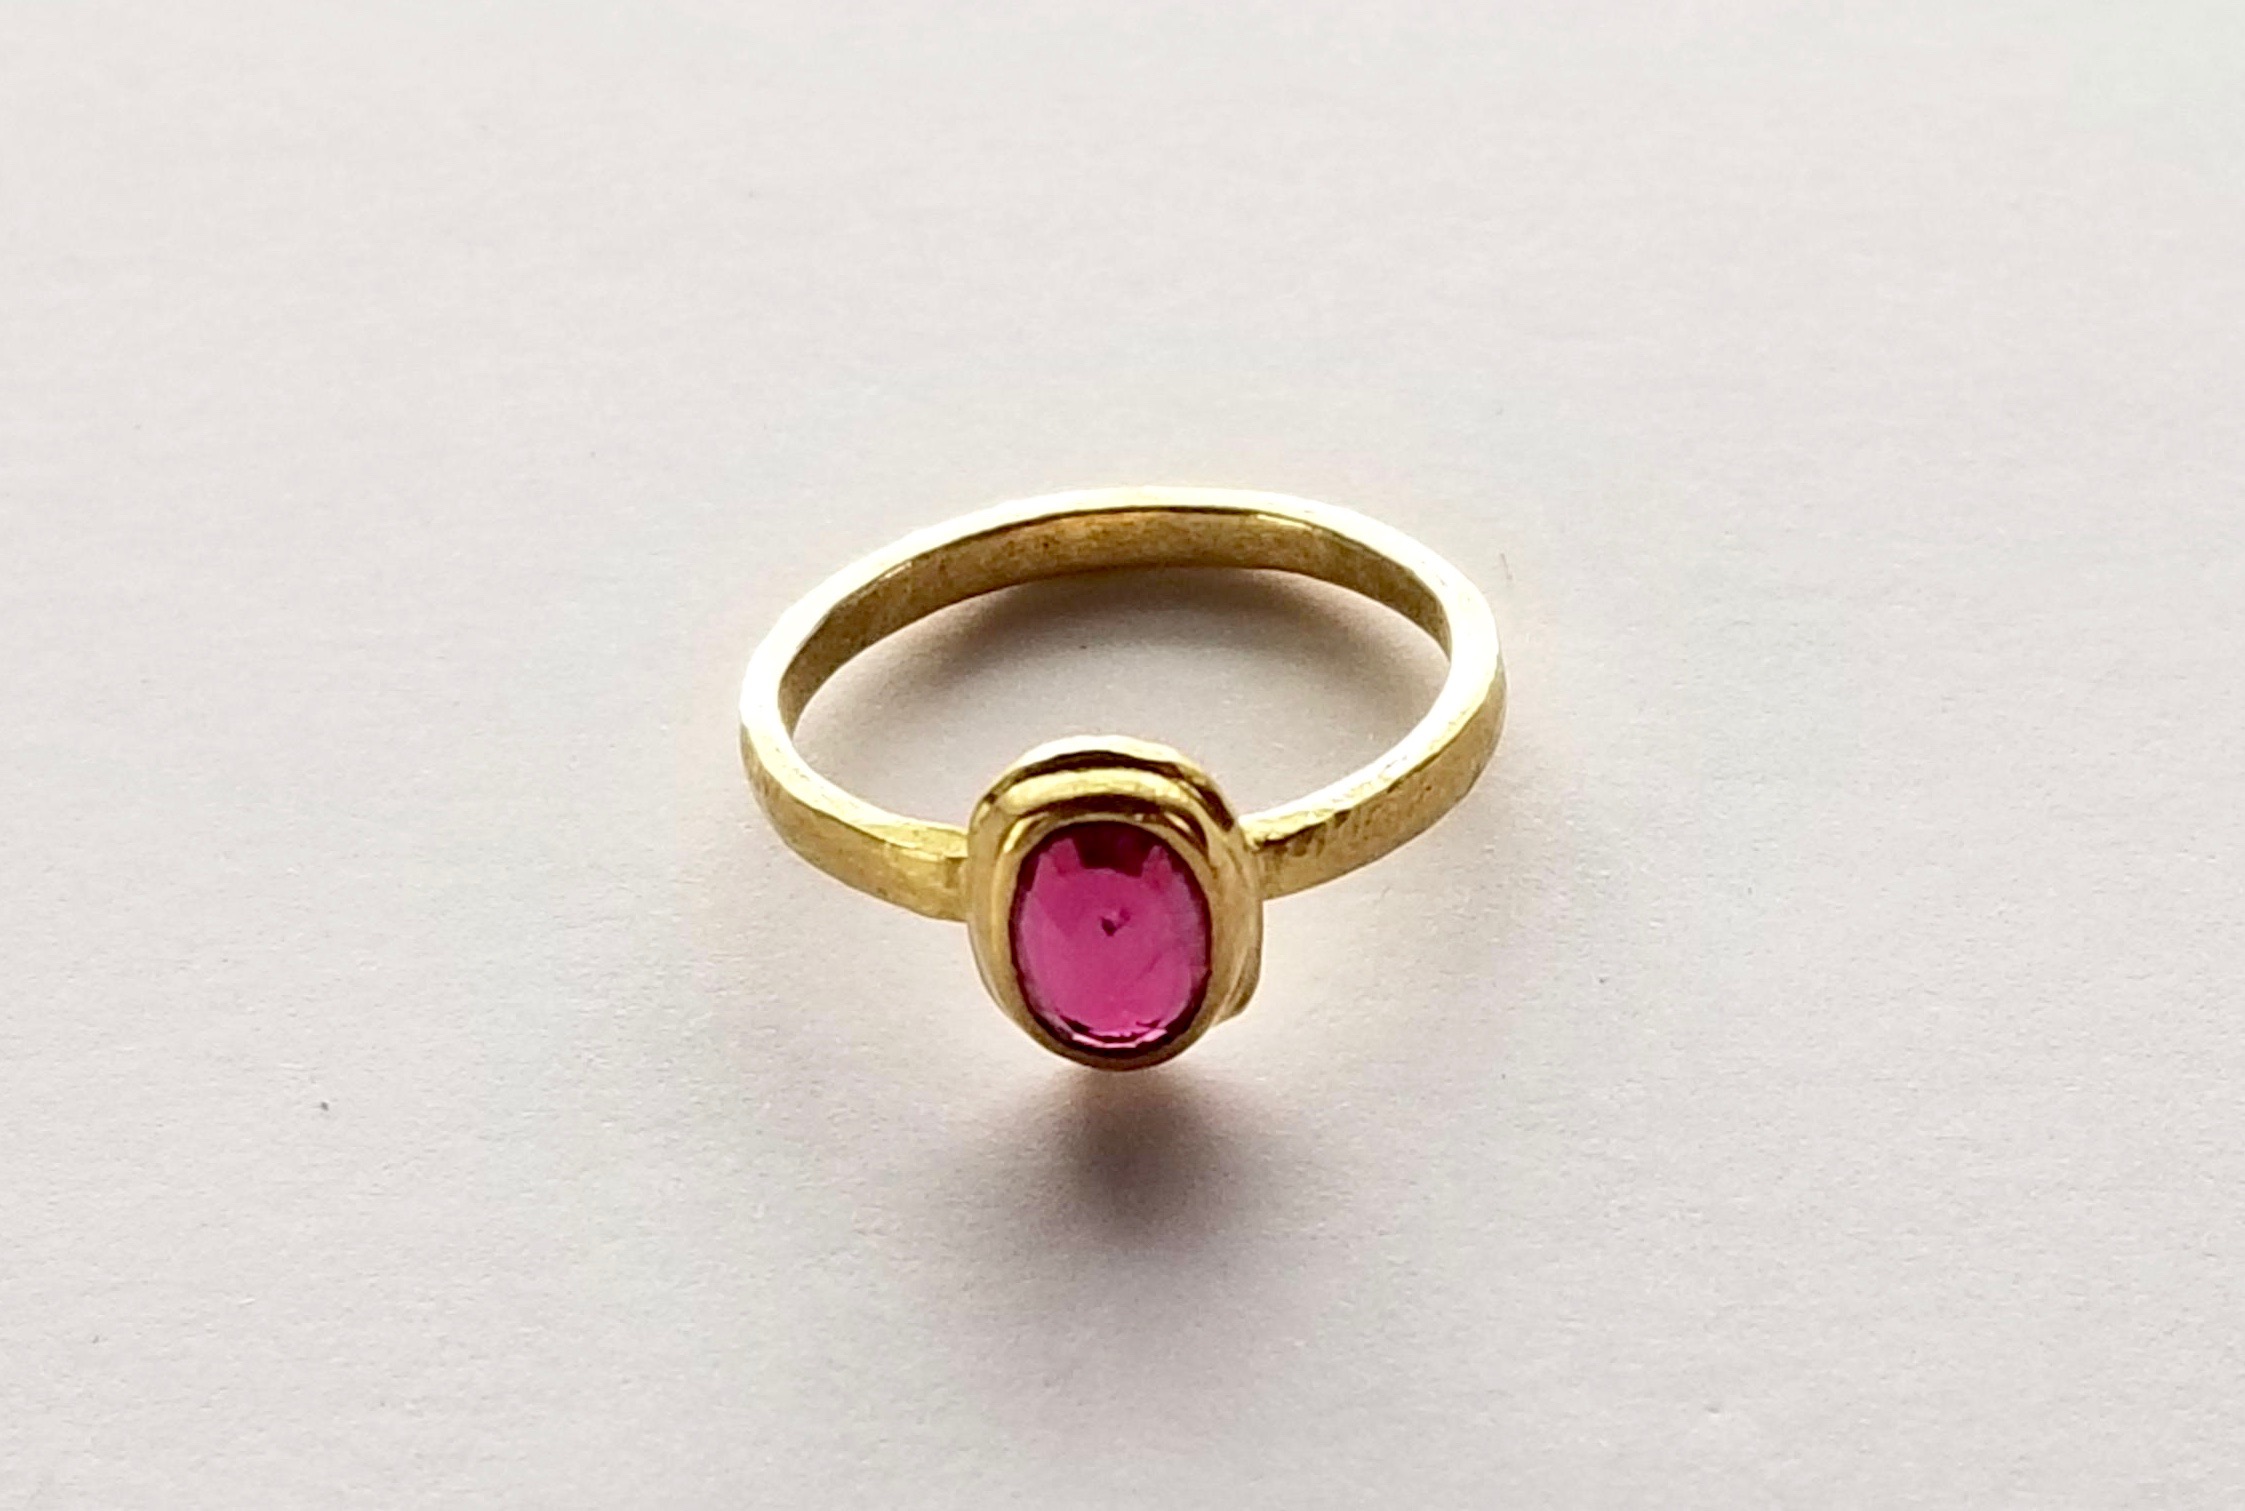 22K Gold Ring with 1 Carat Ruby – Strout Forge